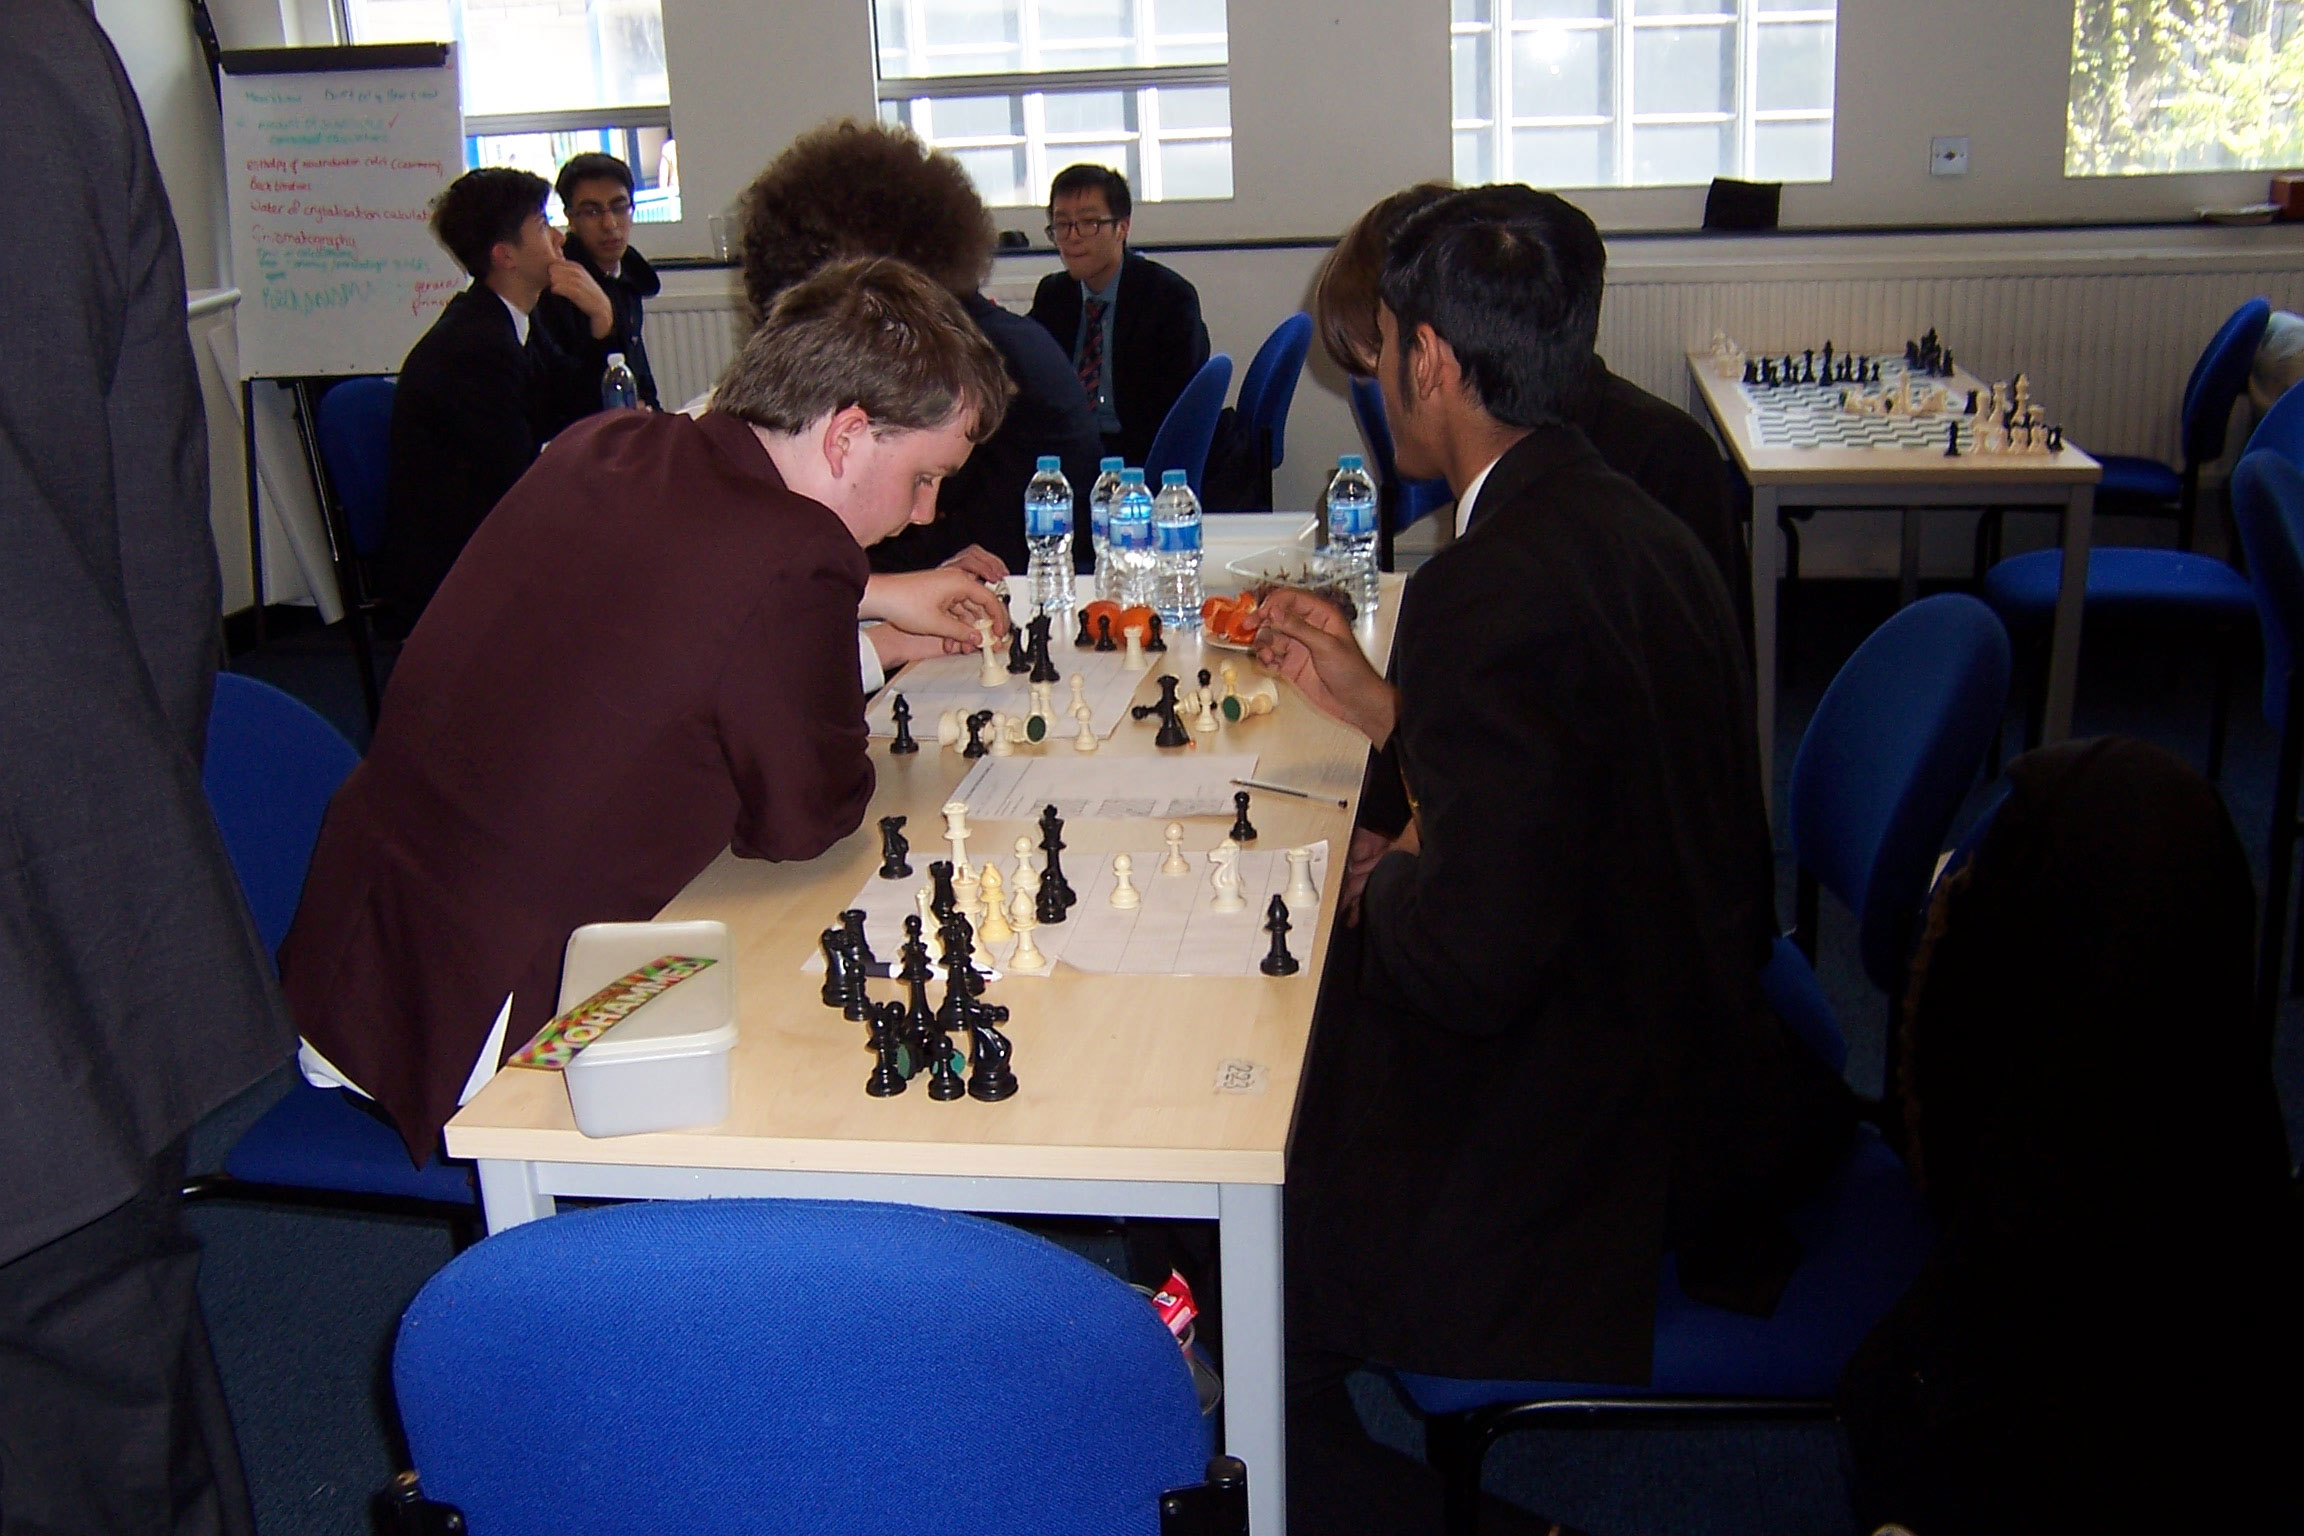 chess problem solving competition